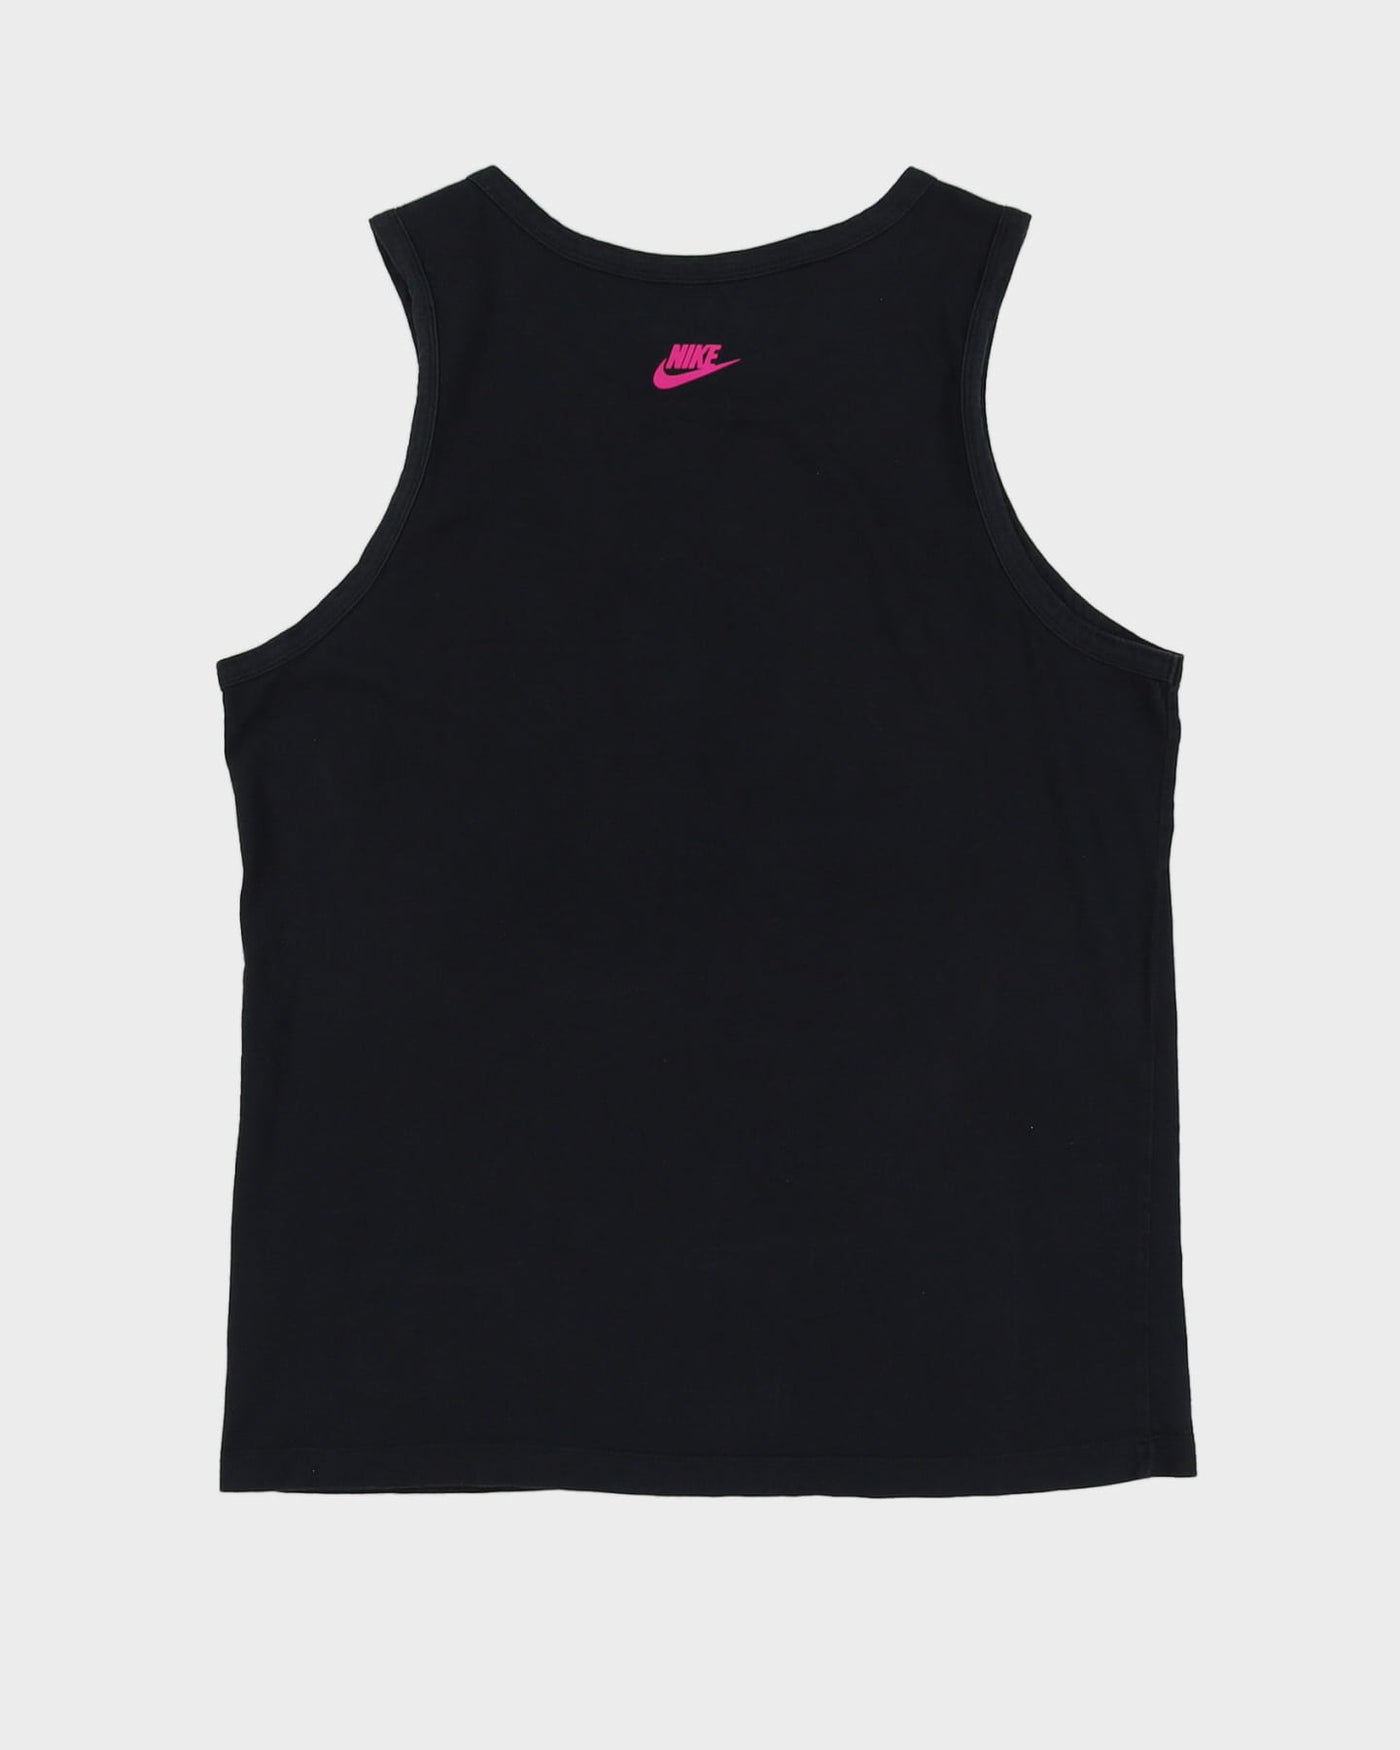 Nike The Swoosh Is Out There Alien Design Black Vest - L